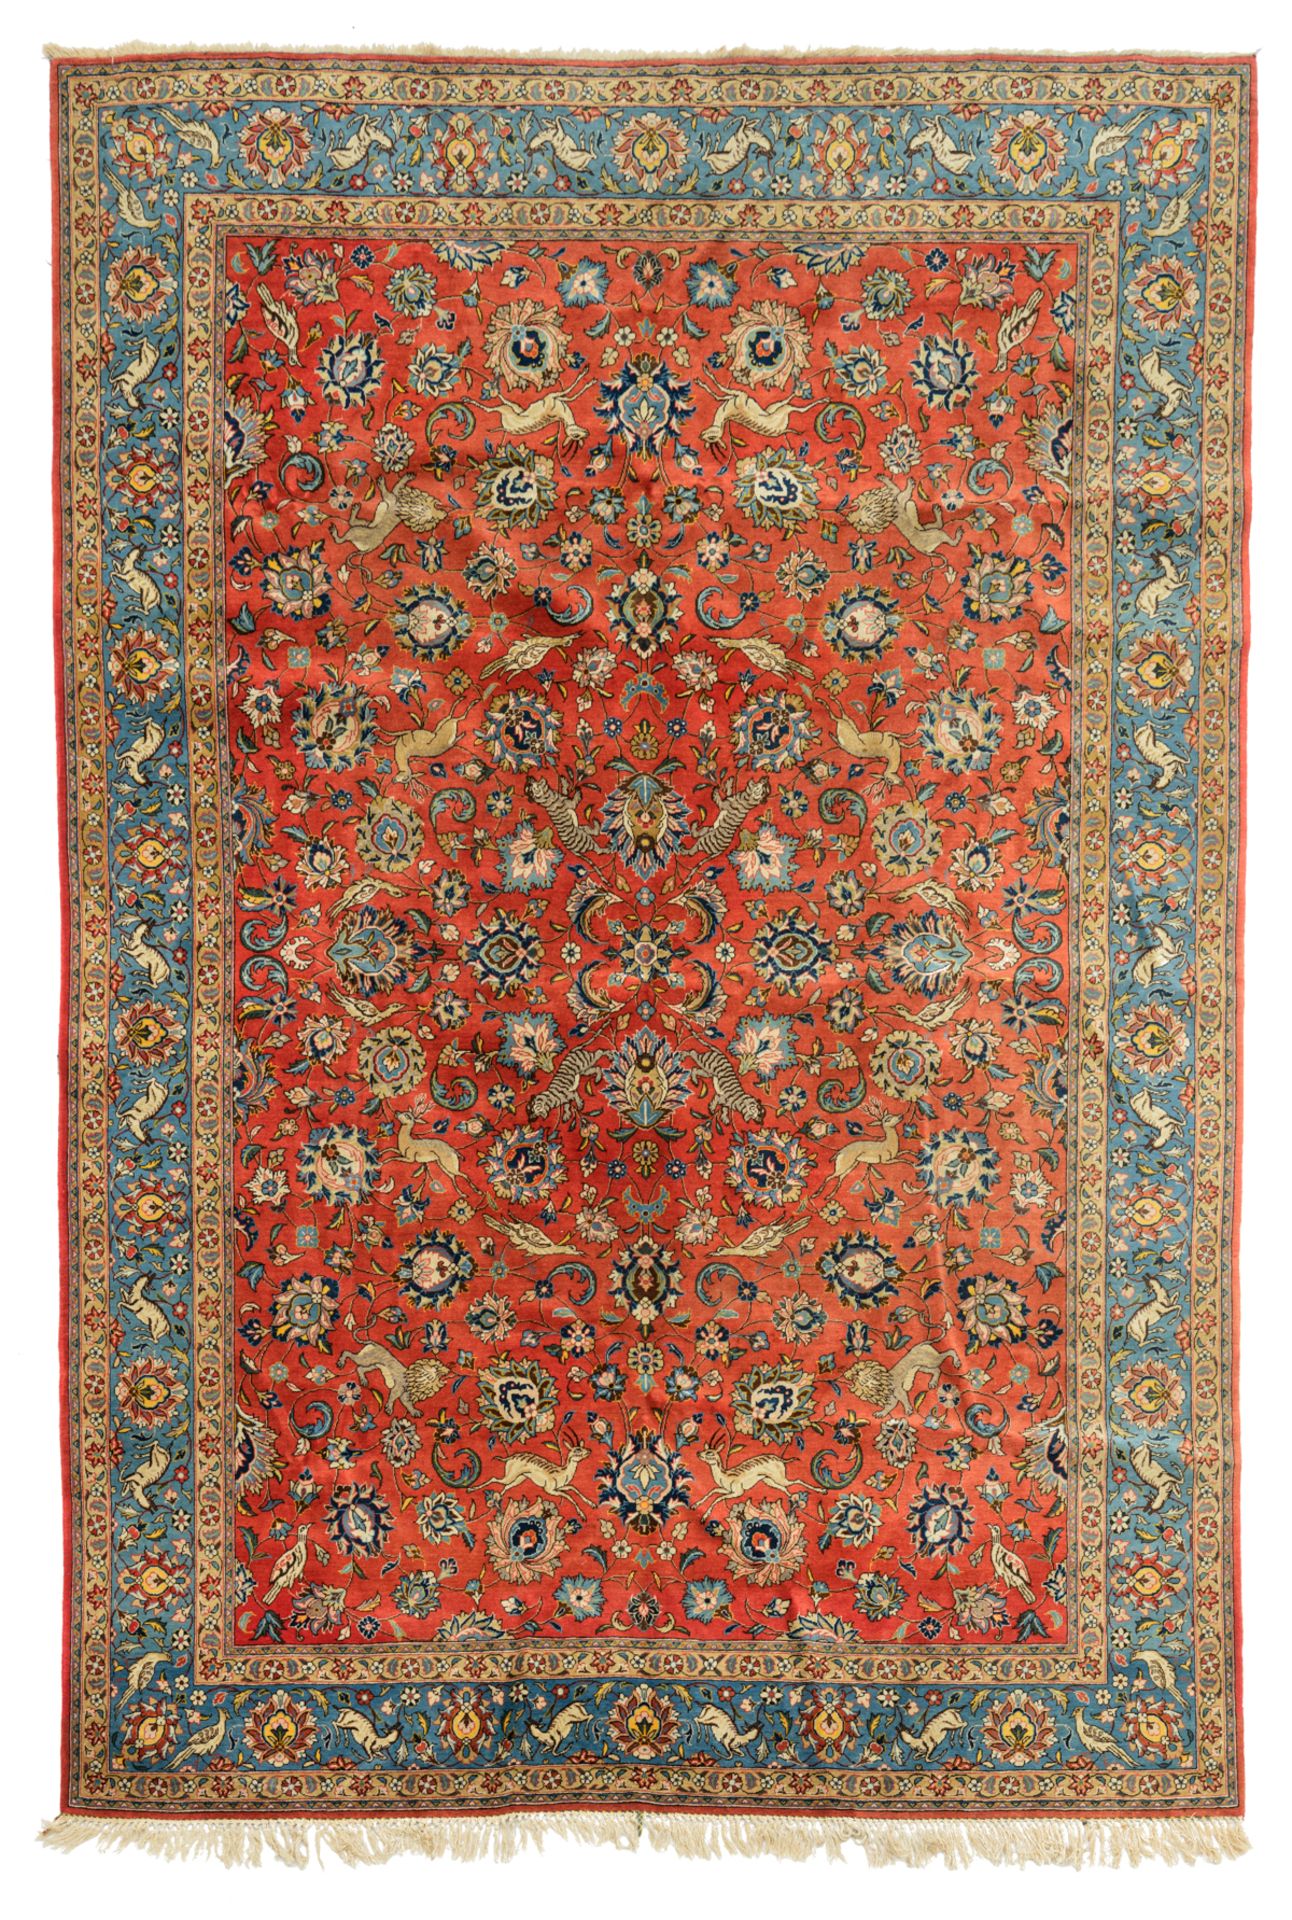 An Oriental woollen rug, decorated with hunting lions, deer and birds surrounded by flowers, 234 x 3